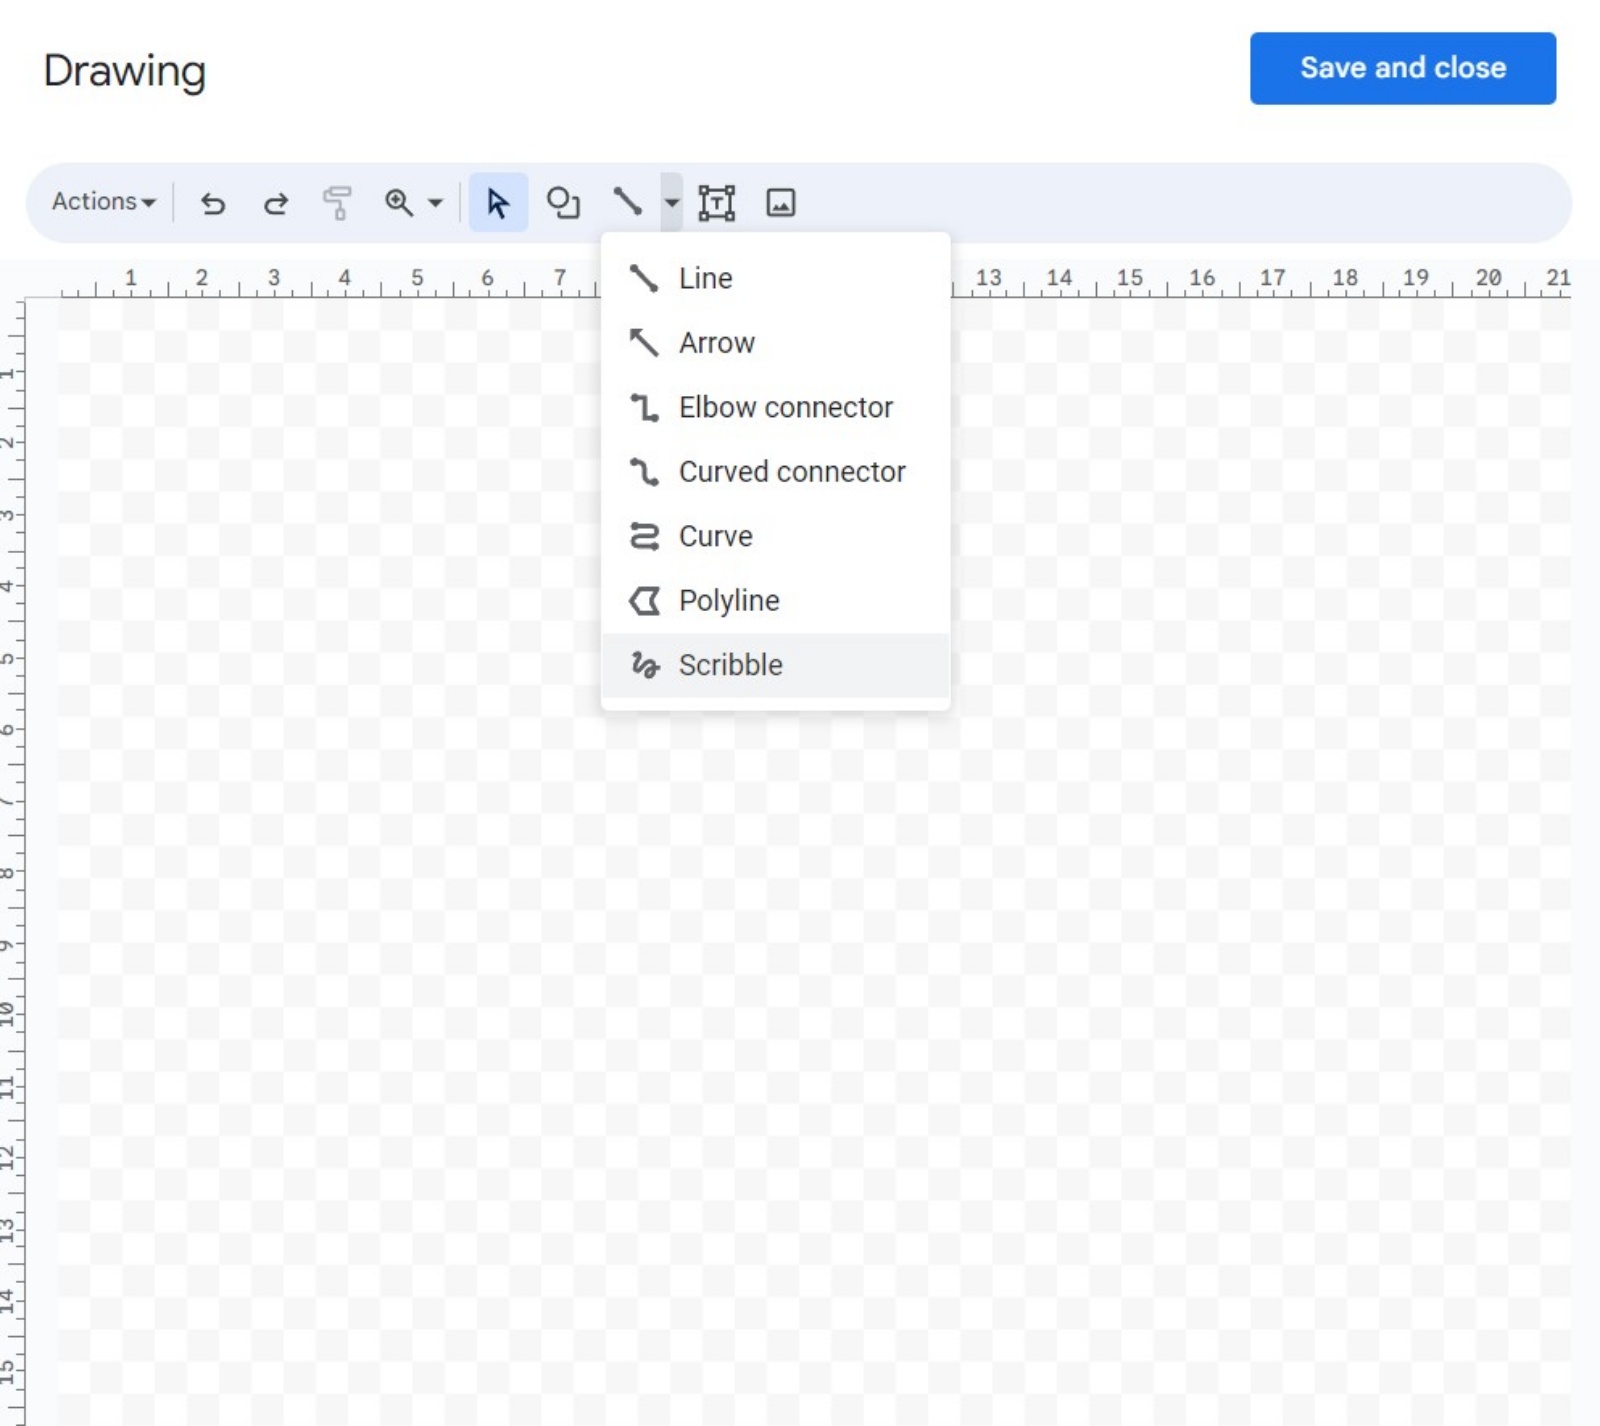 How To Draw on Google Docs: Step-by-step Guide